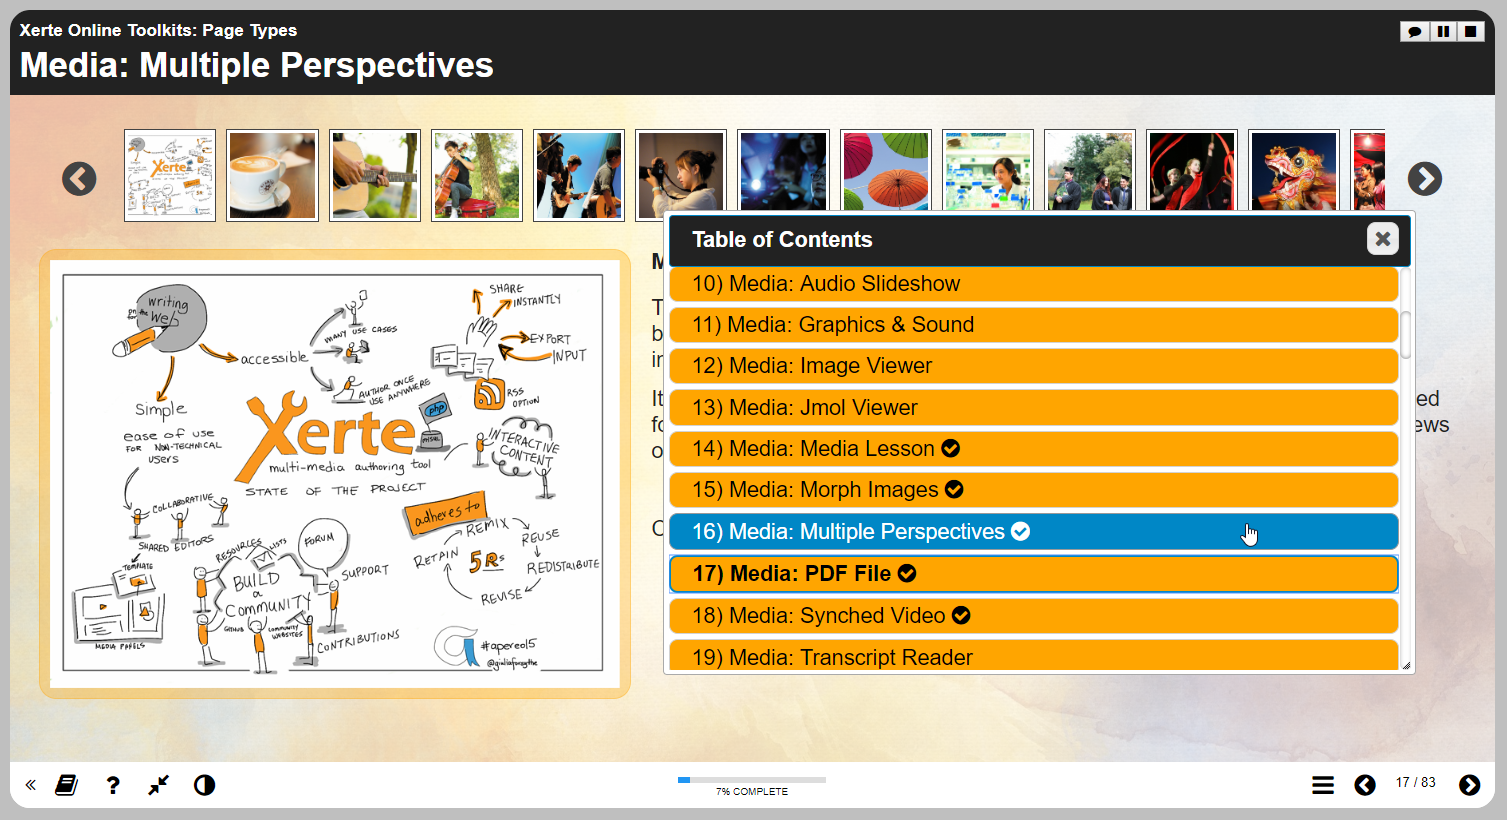 Multiple perspectives page type showing various images and videos